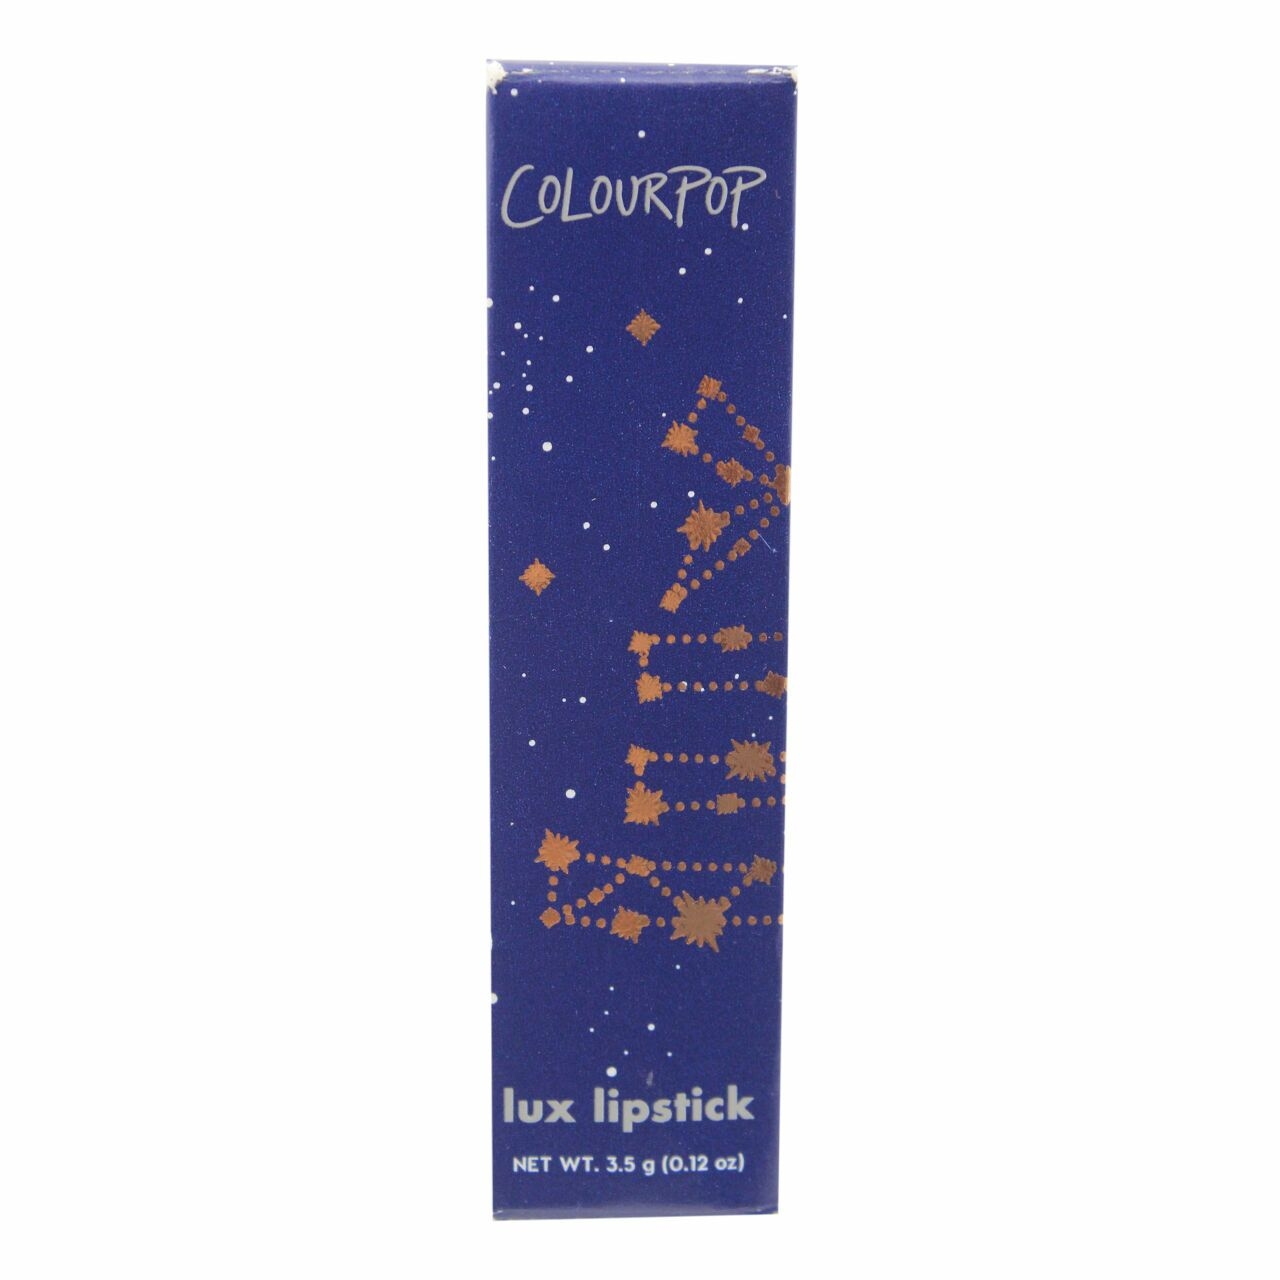 Colourpop Whats Your Sign Lux Lips